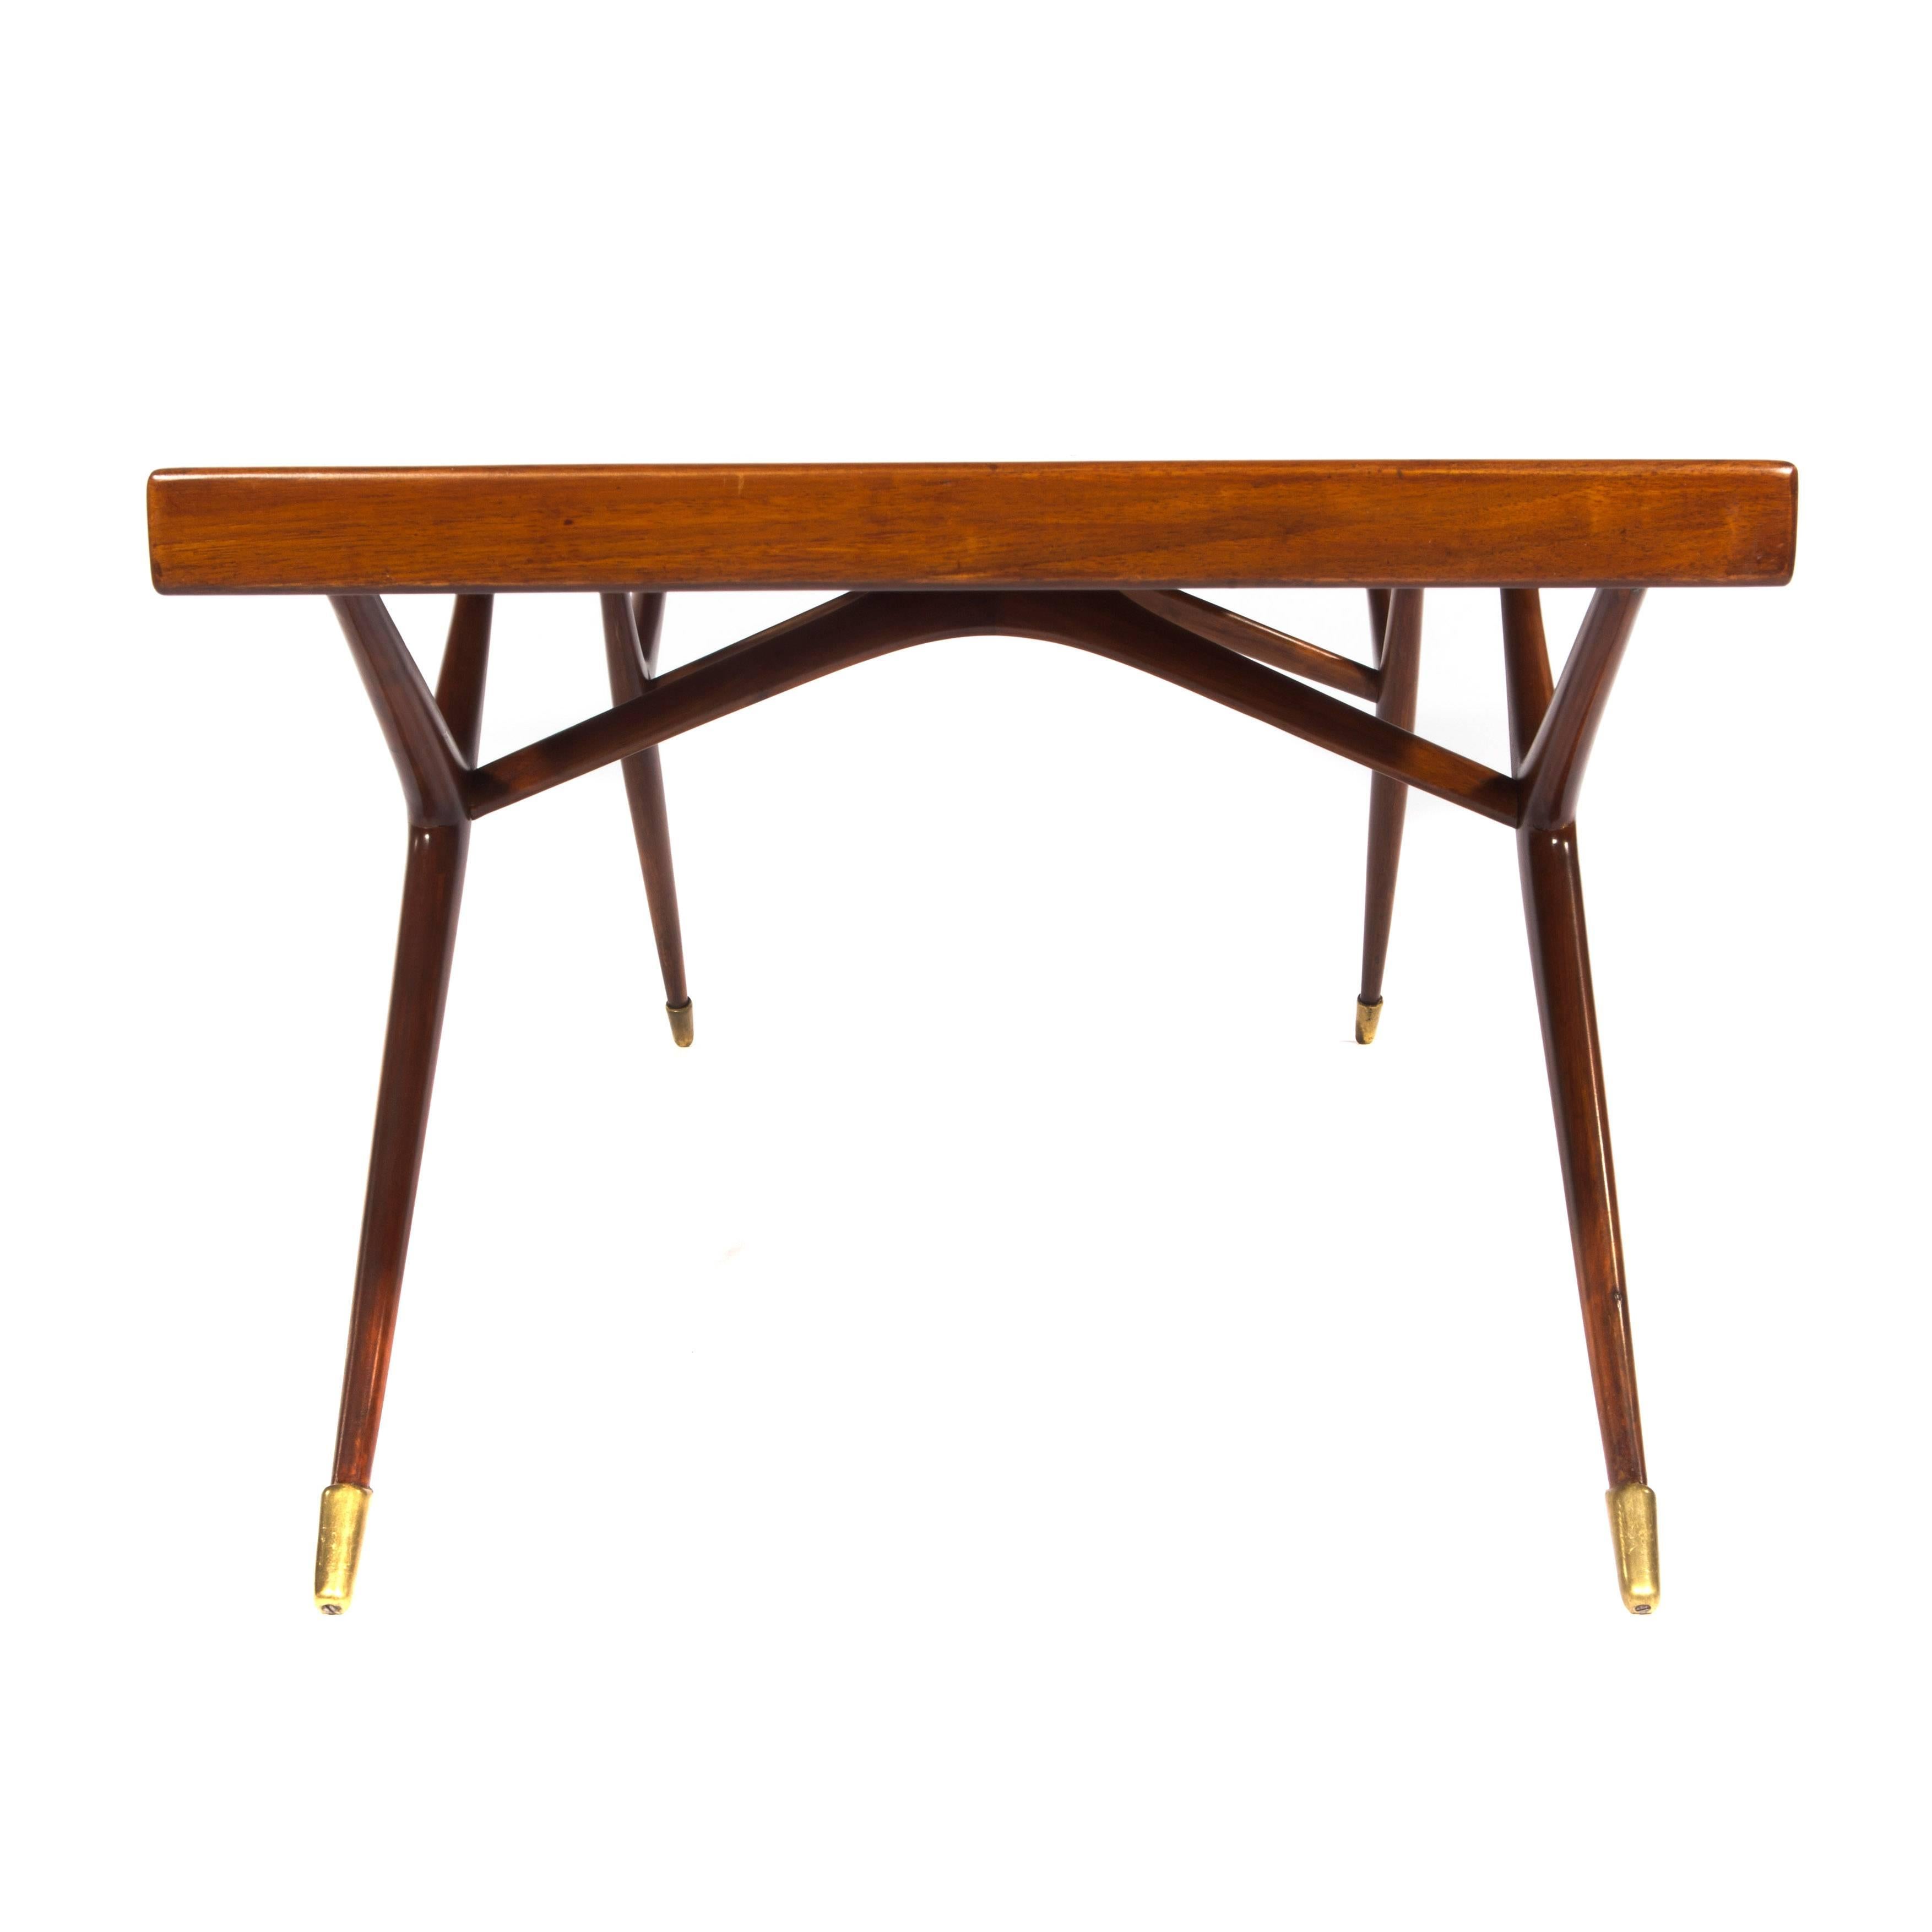 Burl Walnut and Brass 1950s Coffee Table by Ico Parisi for Singer and Sons In Good Condition For Sale In Brooklyn, NY